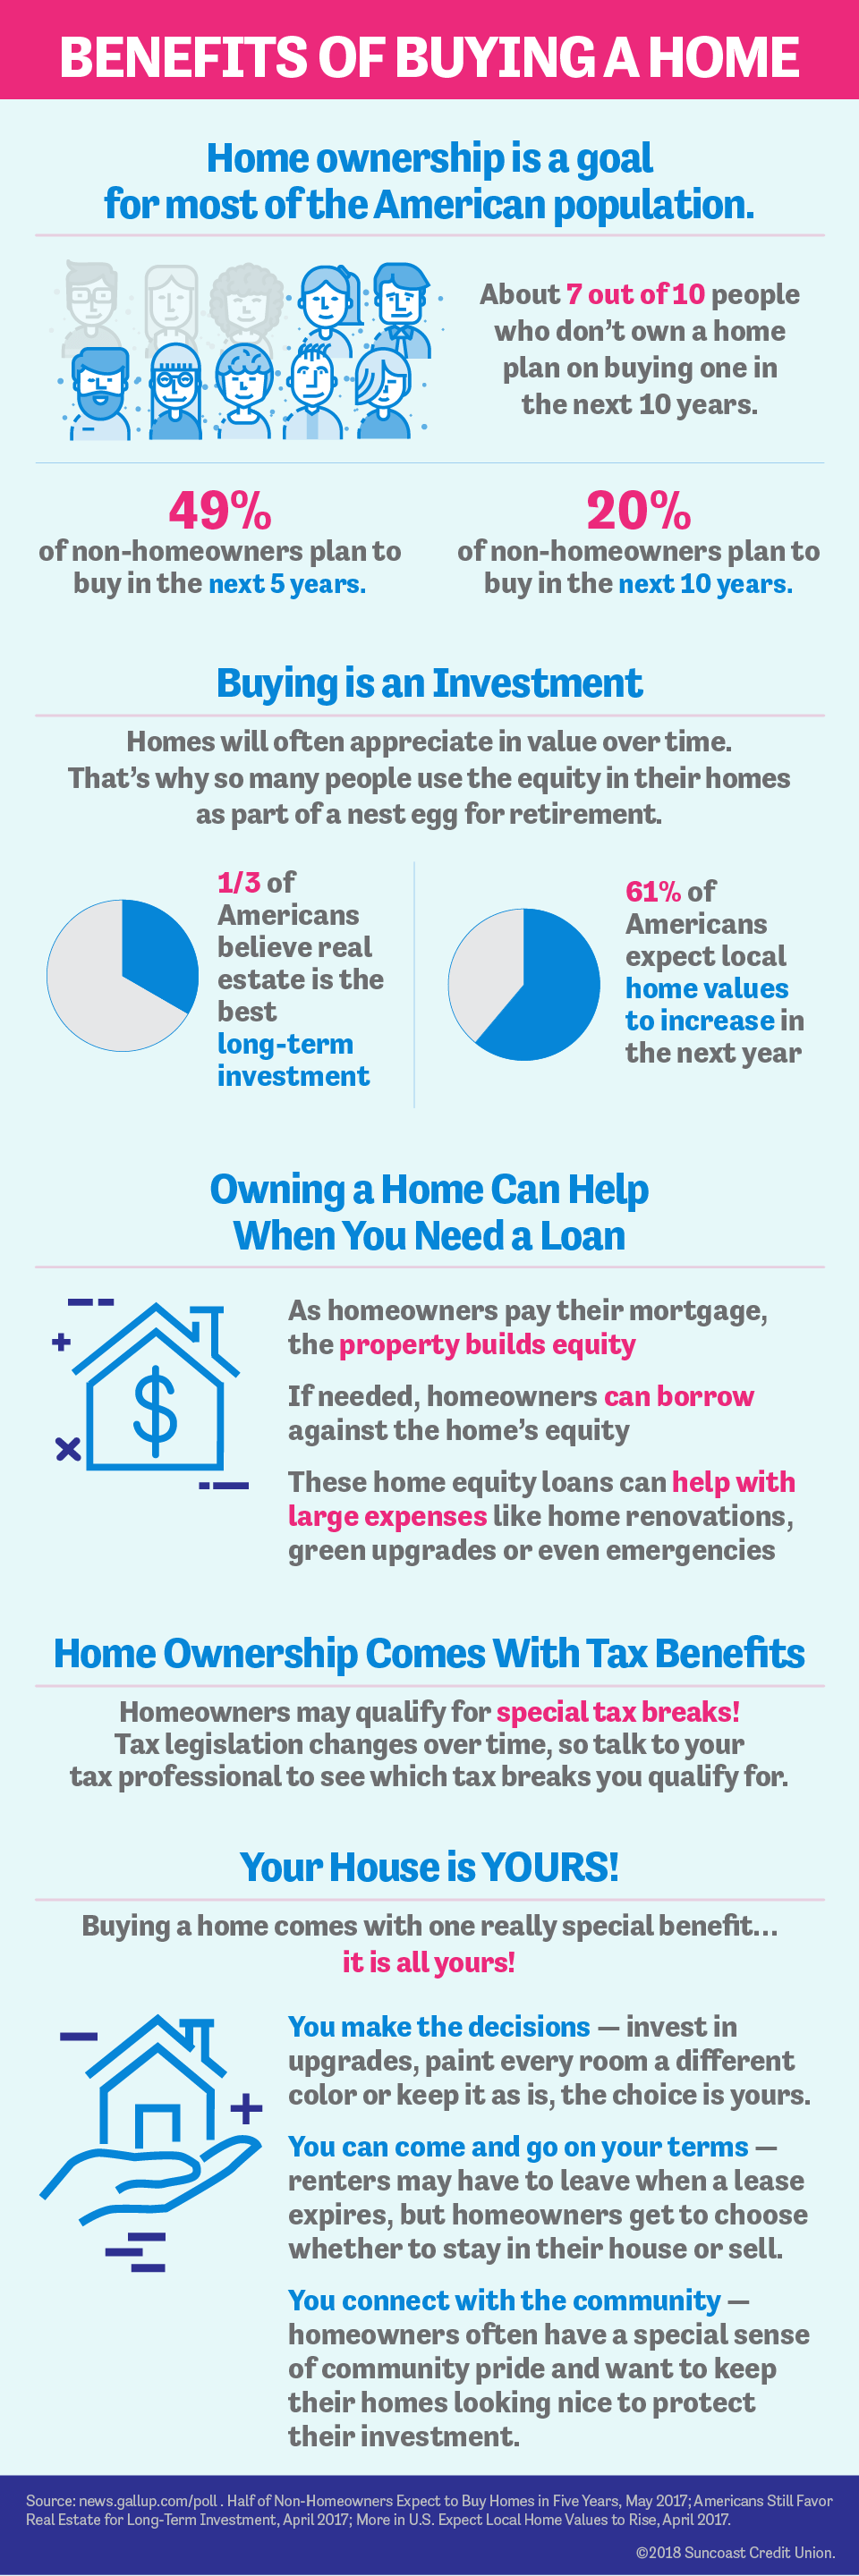 The benefits of buying a home